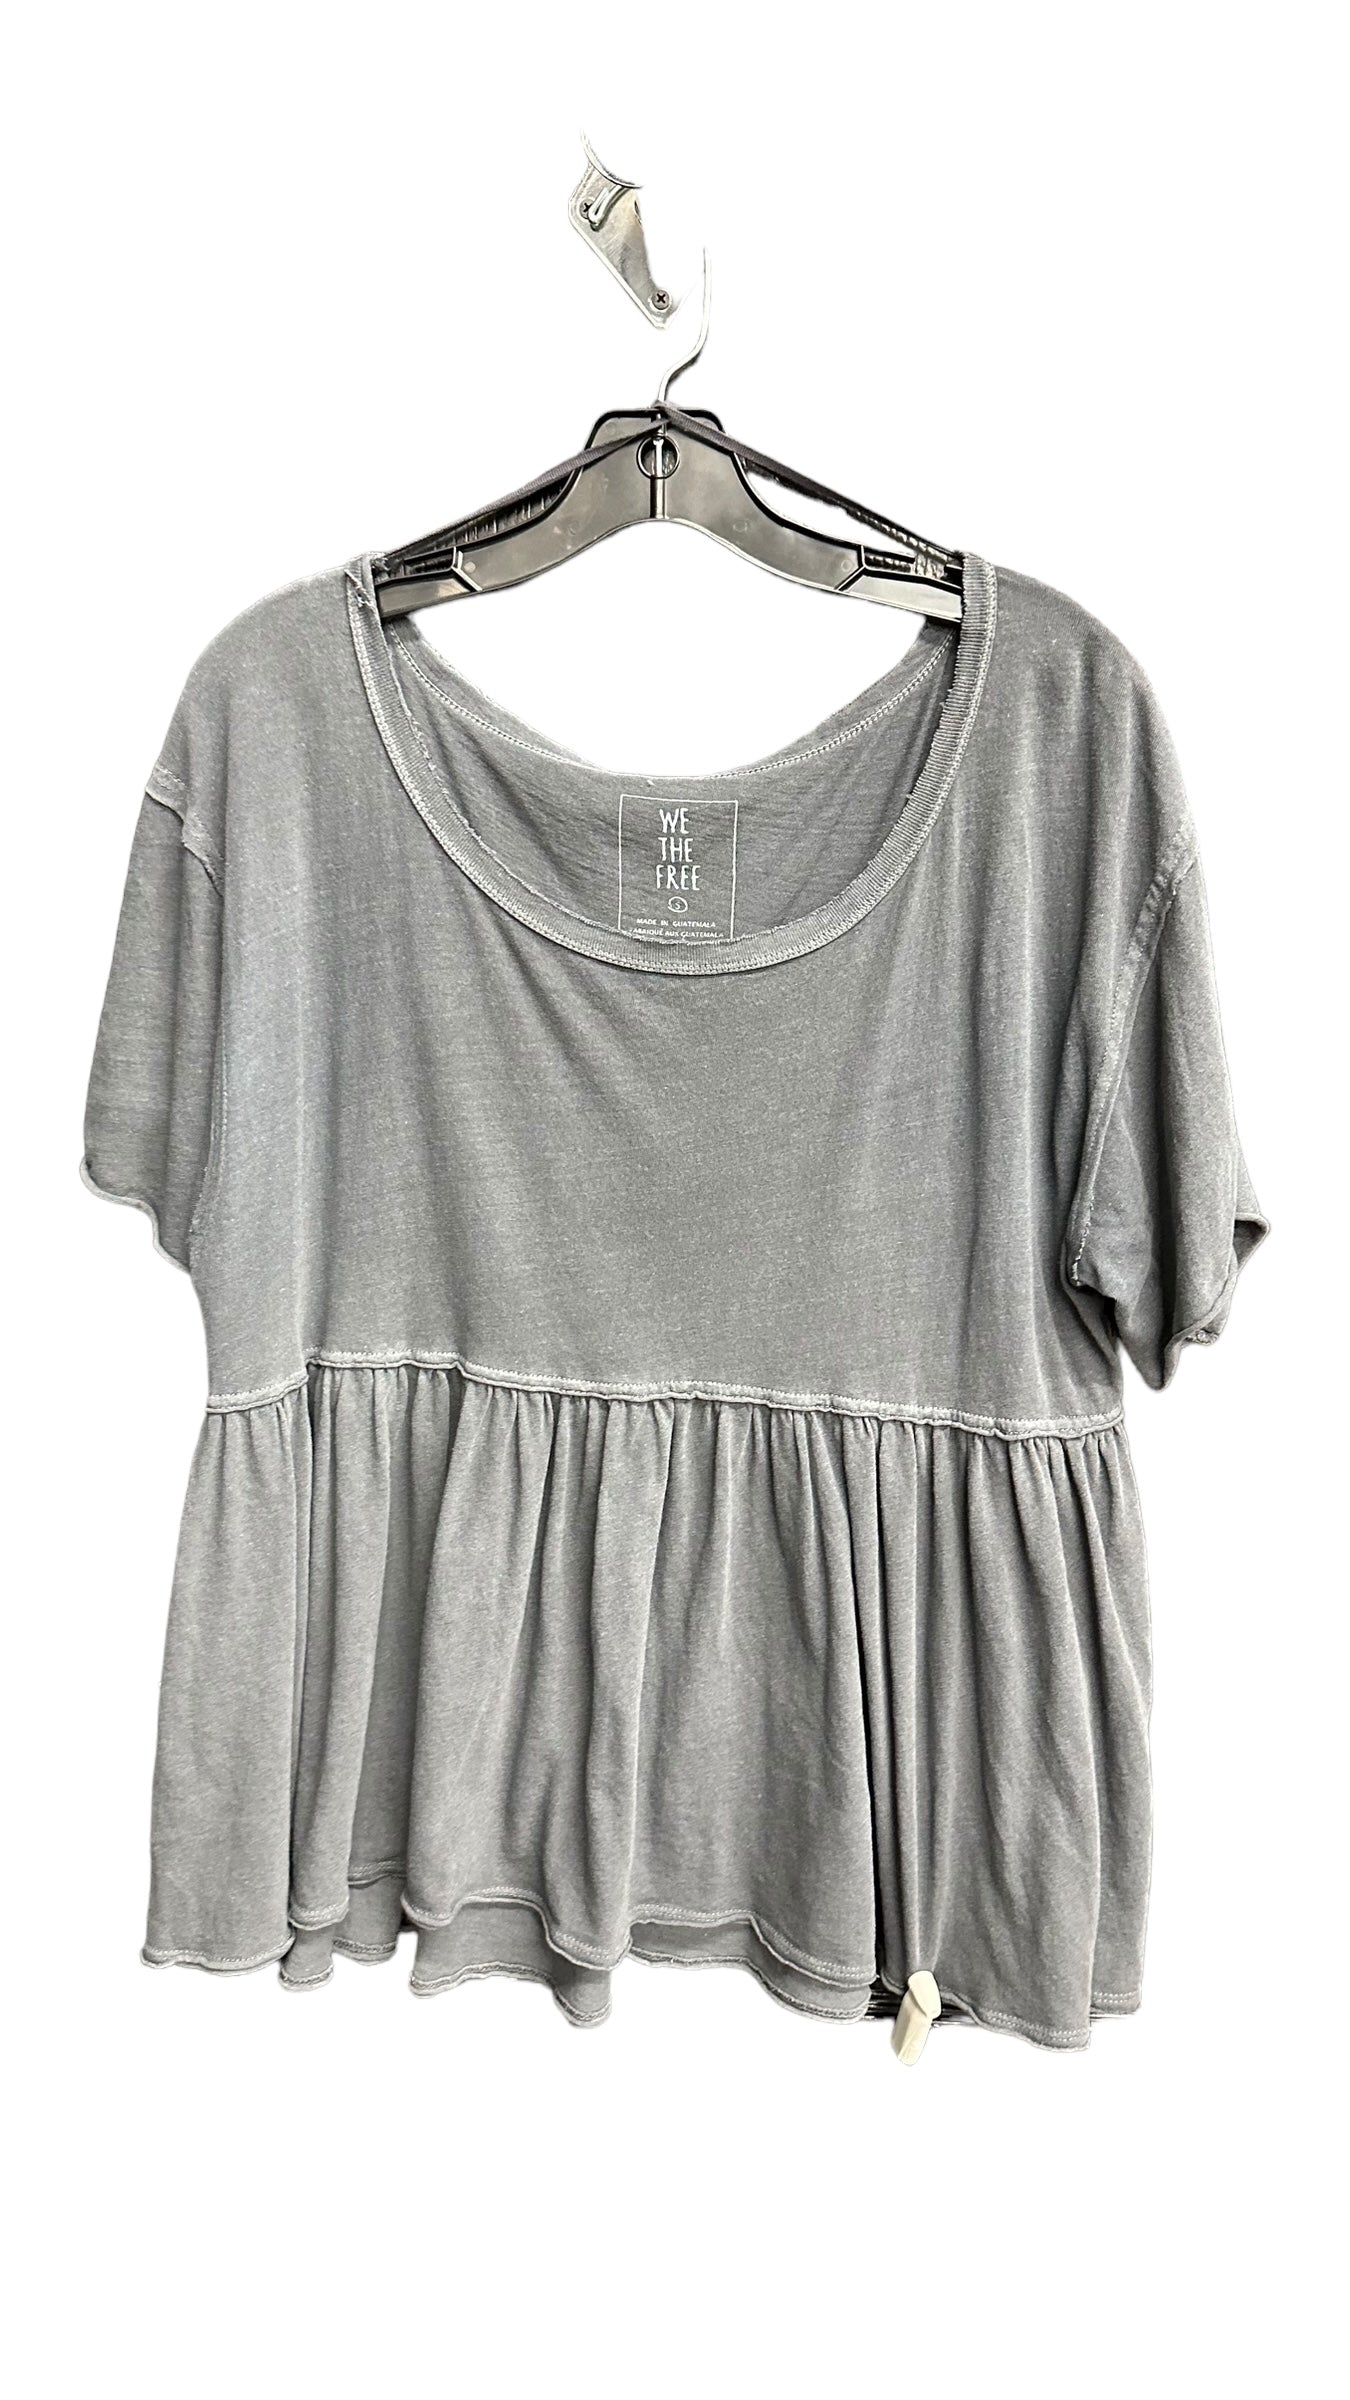 Grey Top Short Sleeve Basic We The Free, Size S